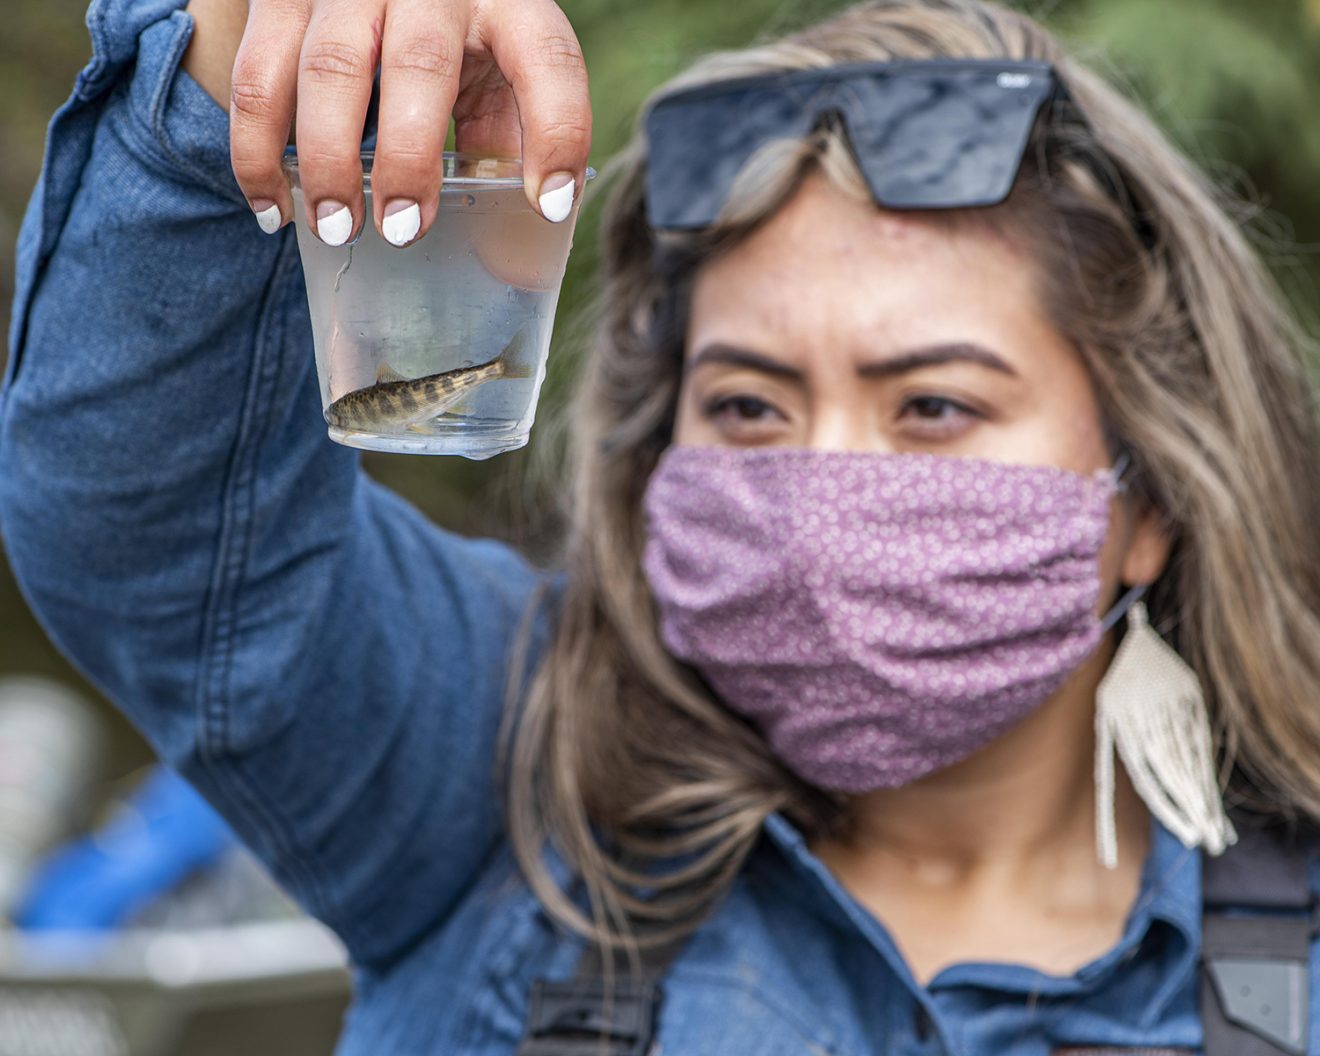 UAF researcher Michelle Quillin examines a juvenile Chinook salmon sampled from the Chena River, August 21, 2020. Photo by Seth Adams/Seth Adams Photography